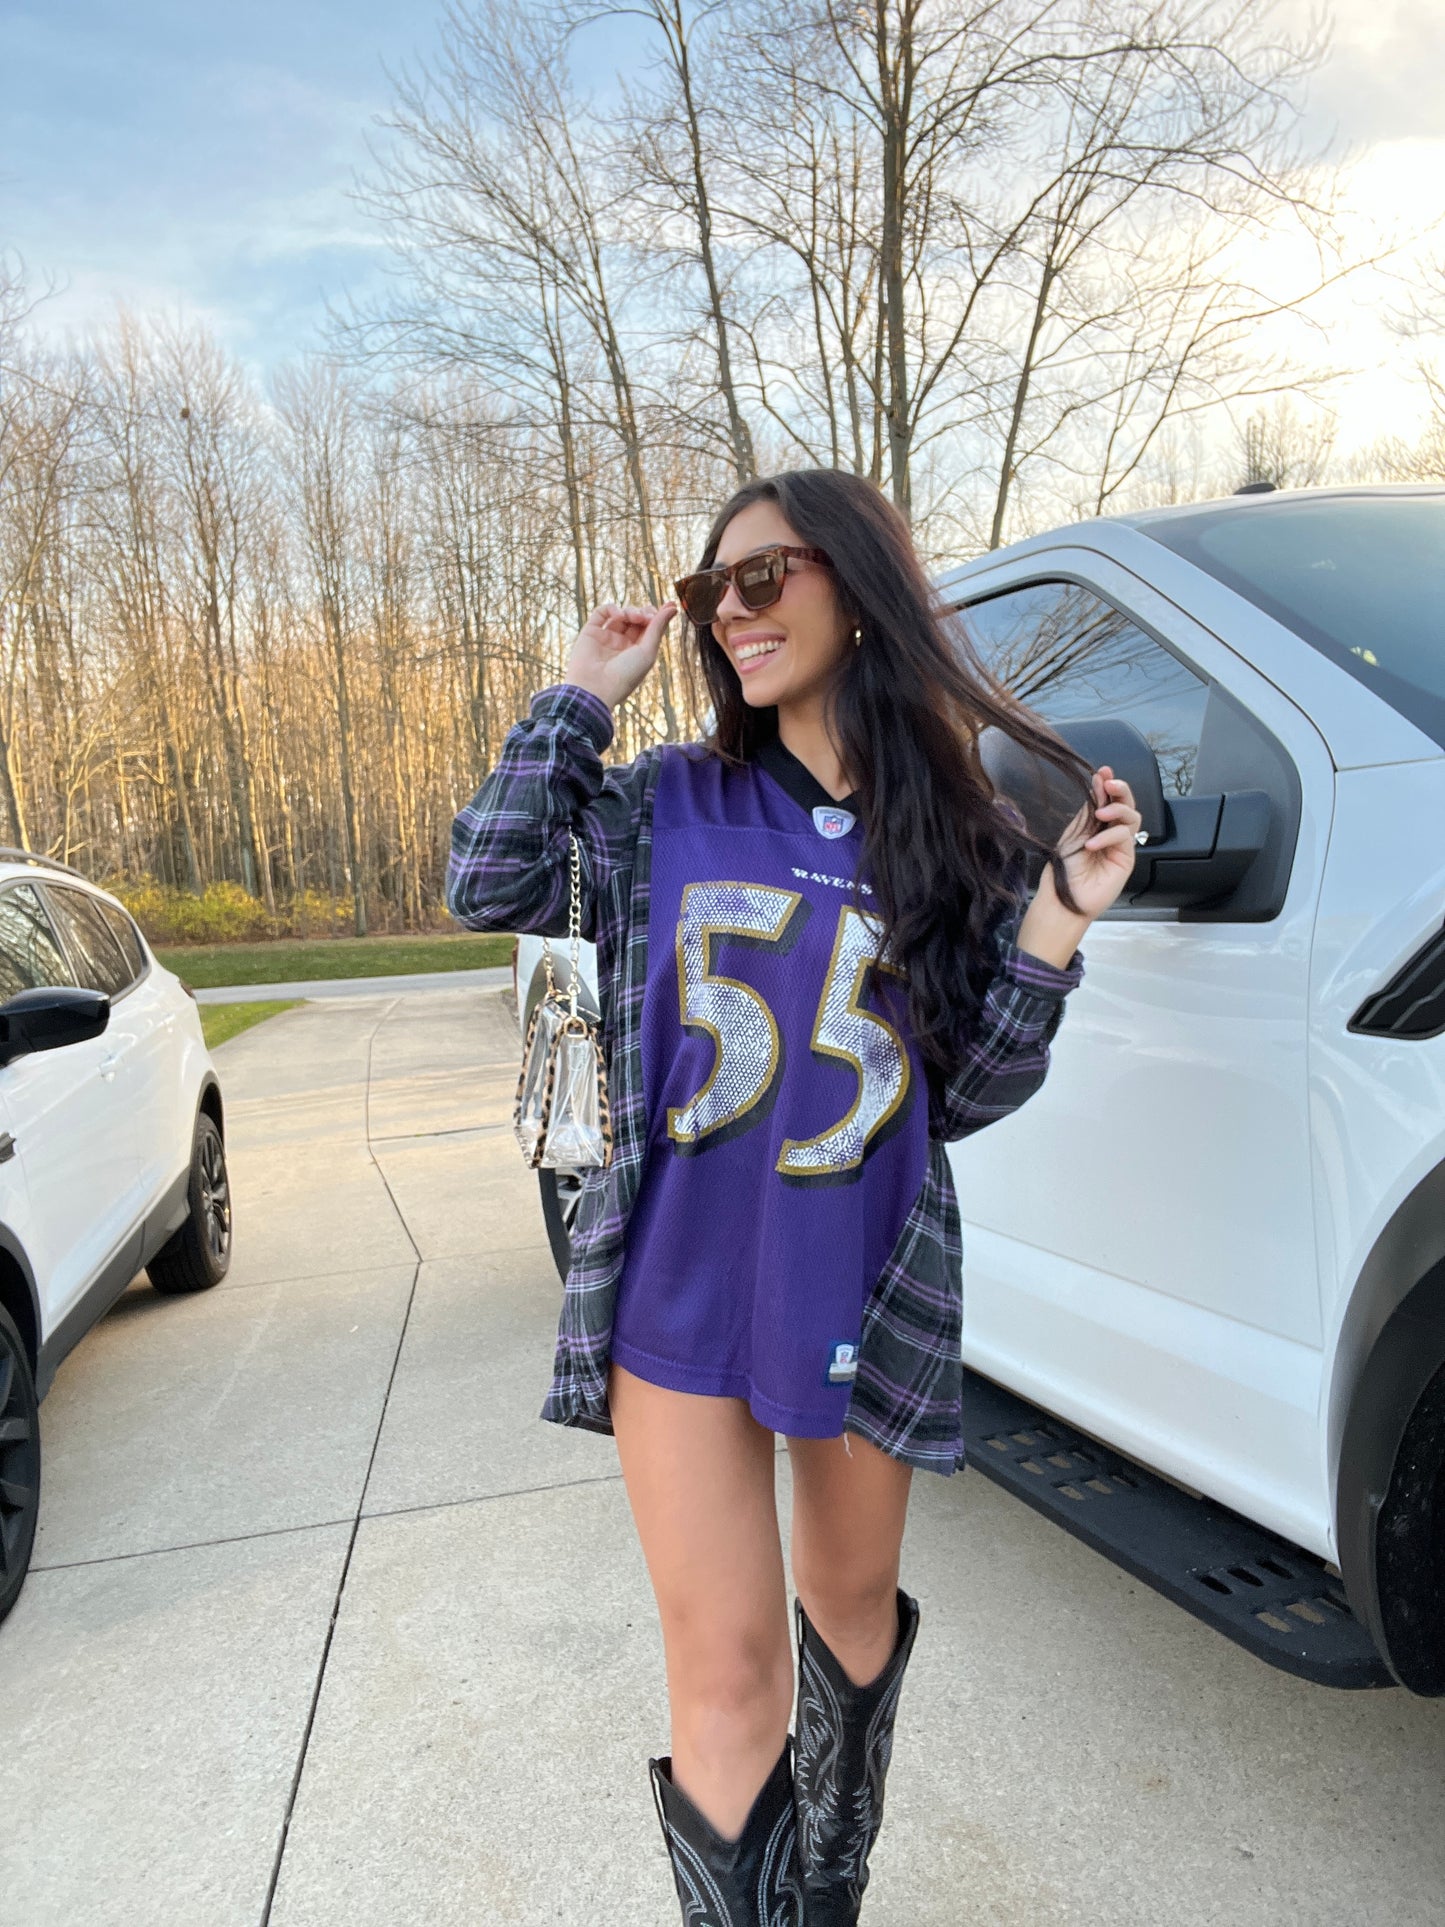 #55 SUGGS BALTIMORE JERSEY X FLANNEL